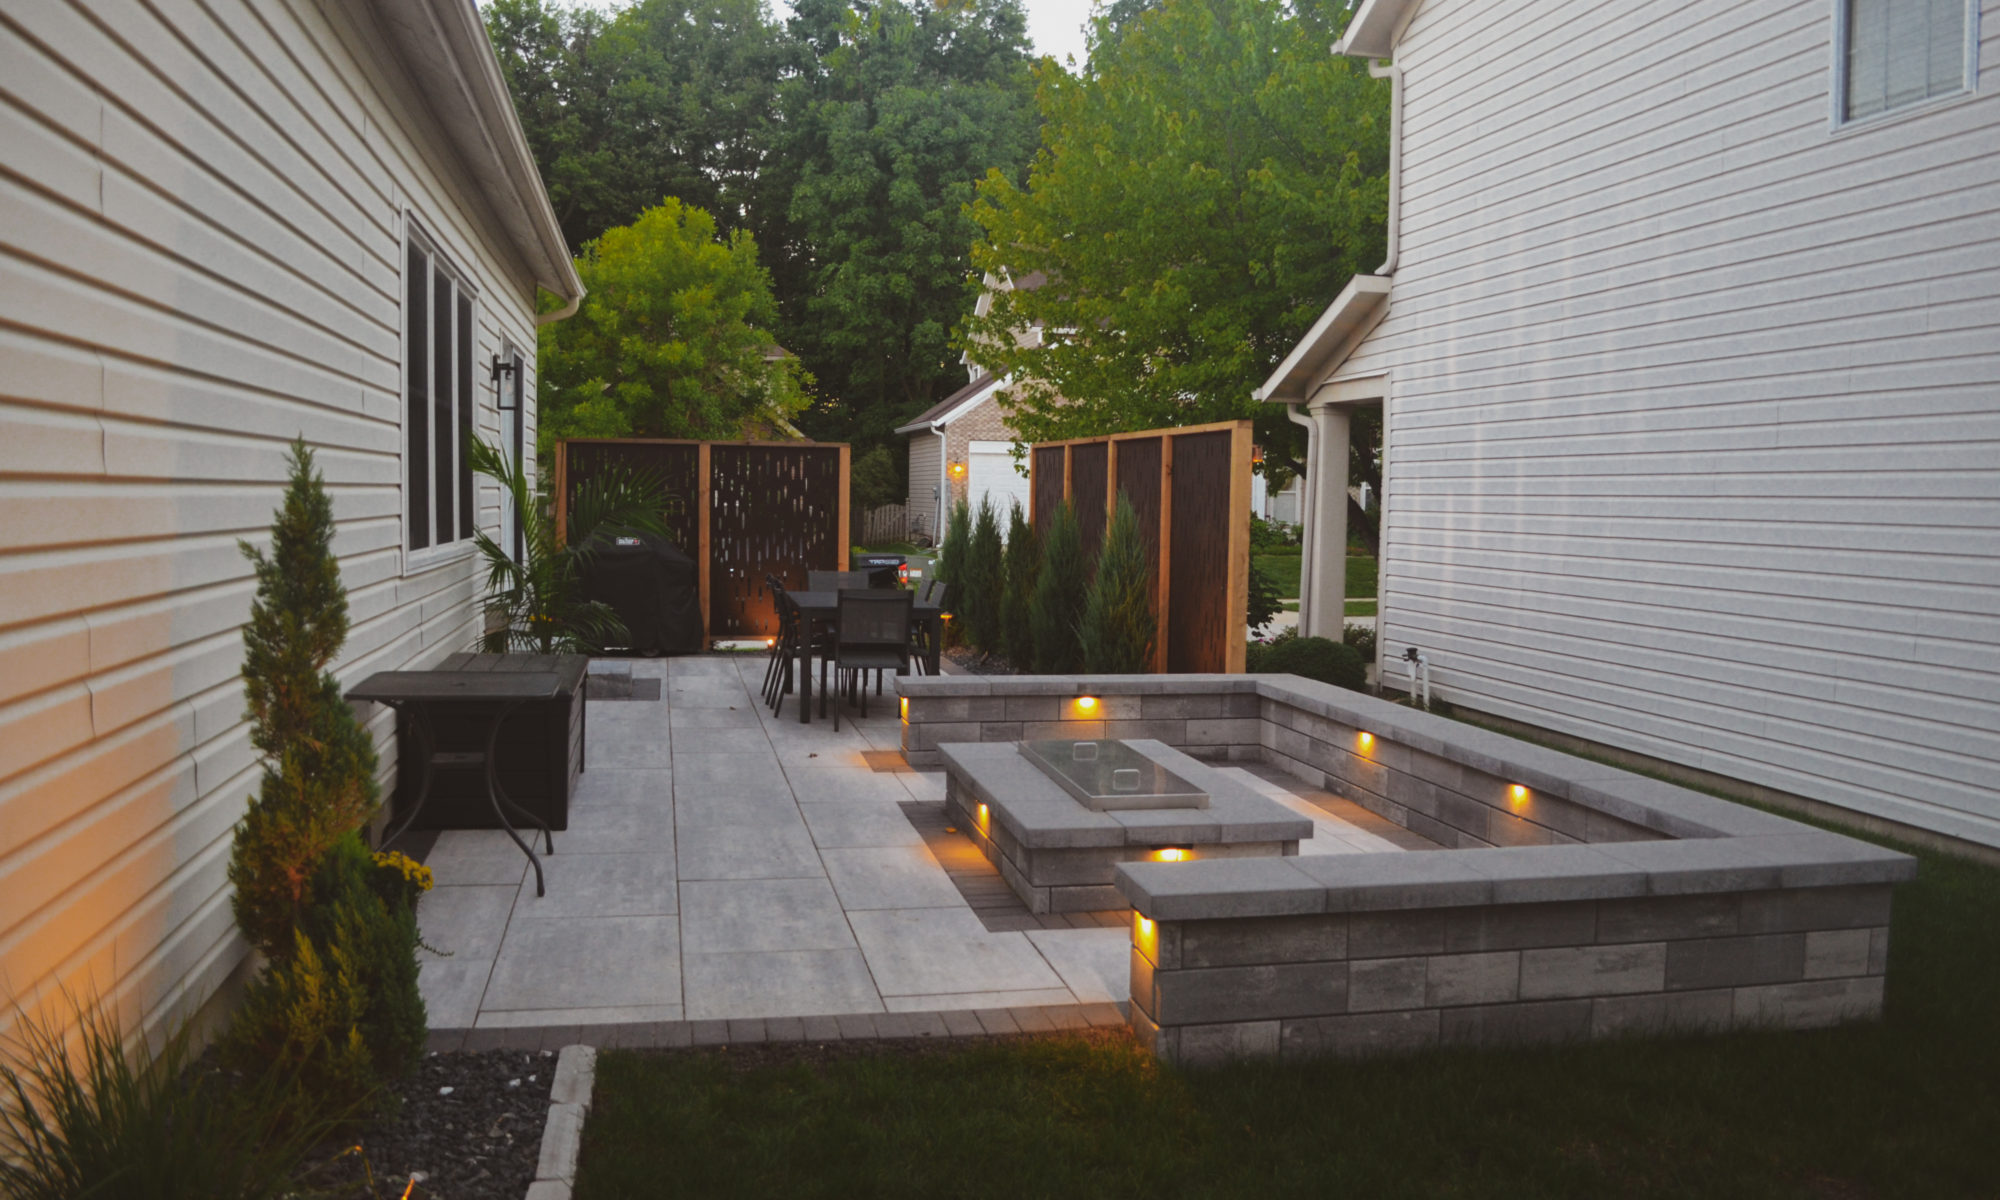 The Private Plaza privacy screens custom landscaping fire pit arborvitae private dining privacy Carmel indiana landscaping walkway